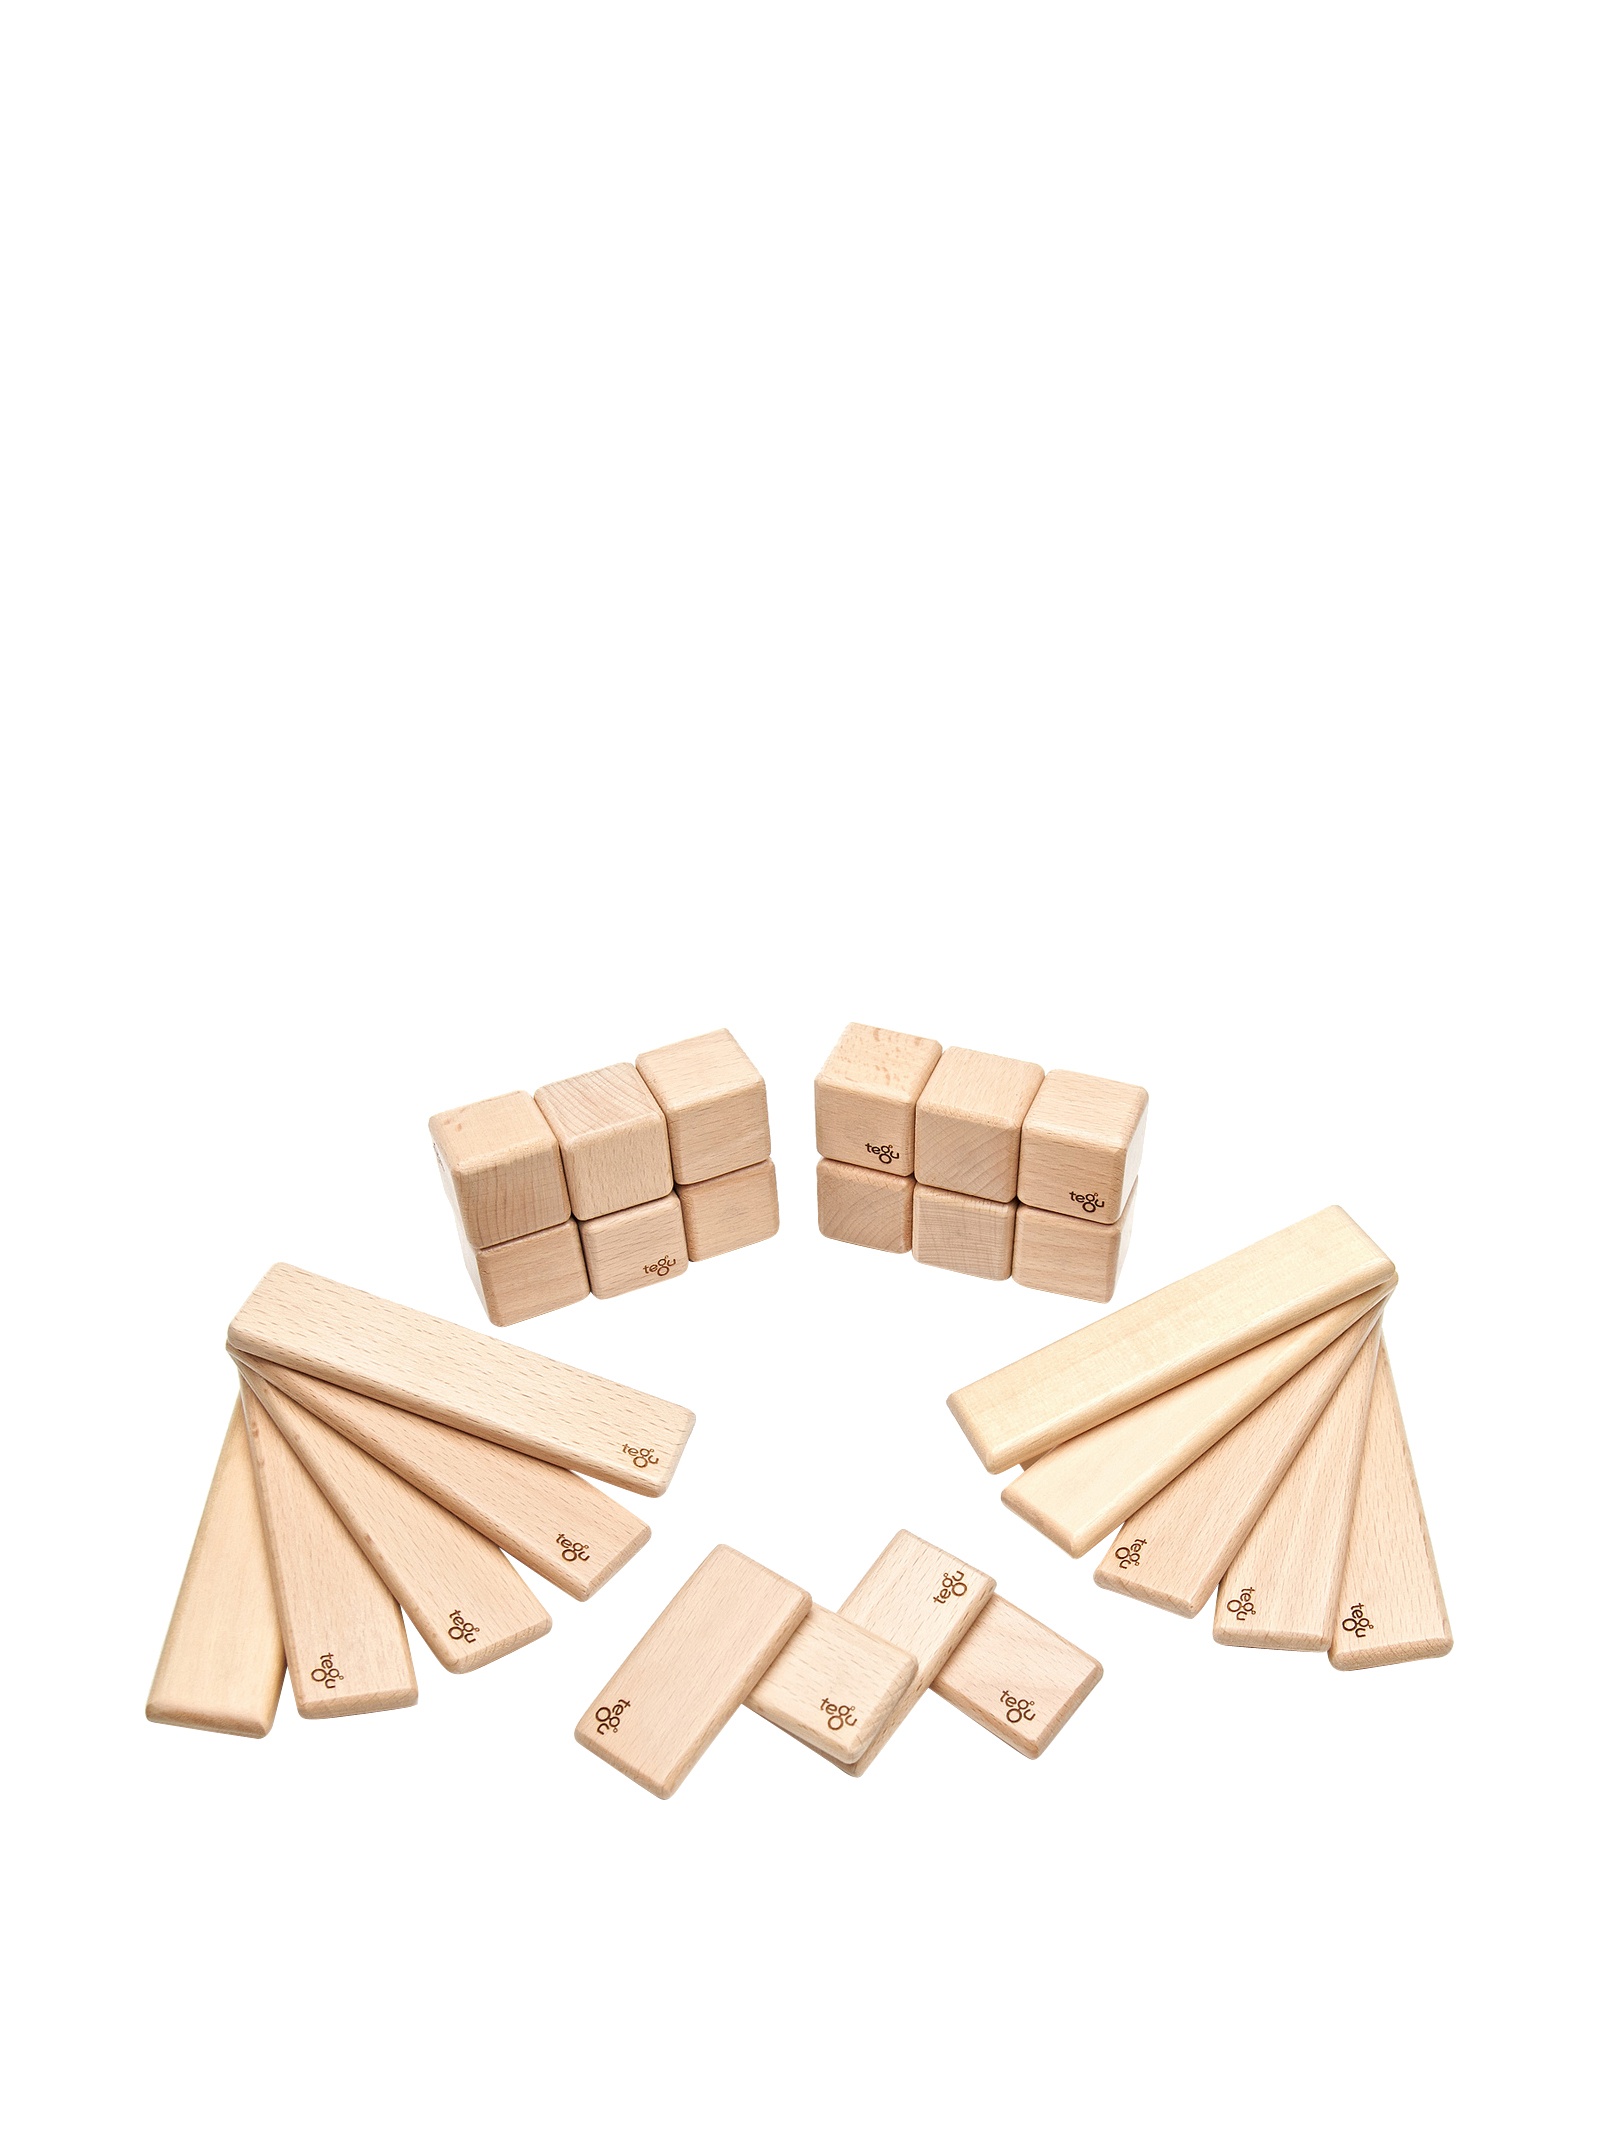 26 Piece Tegu Discovery Magnetic Wooden Block Set, Natural